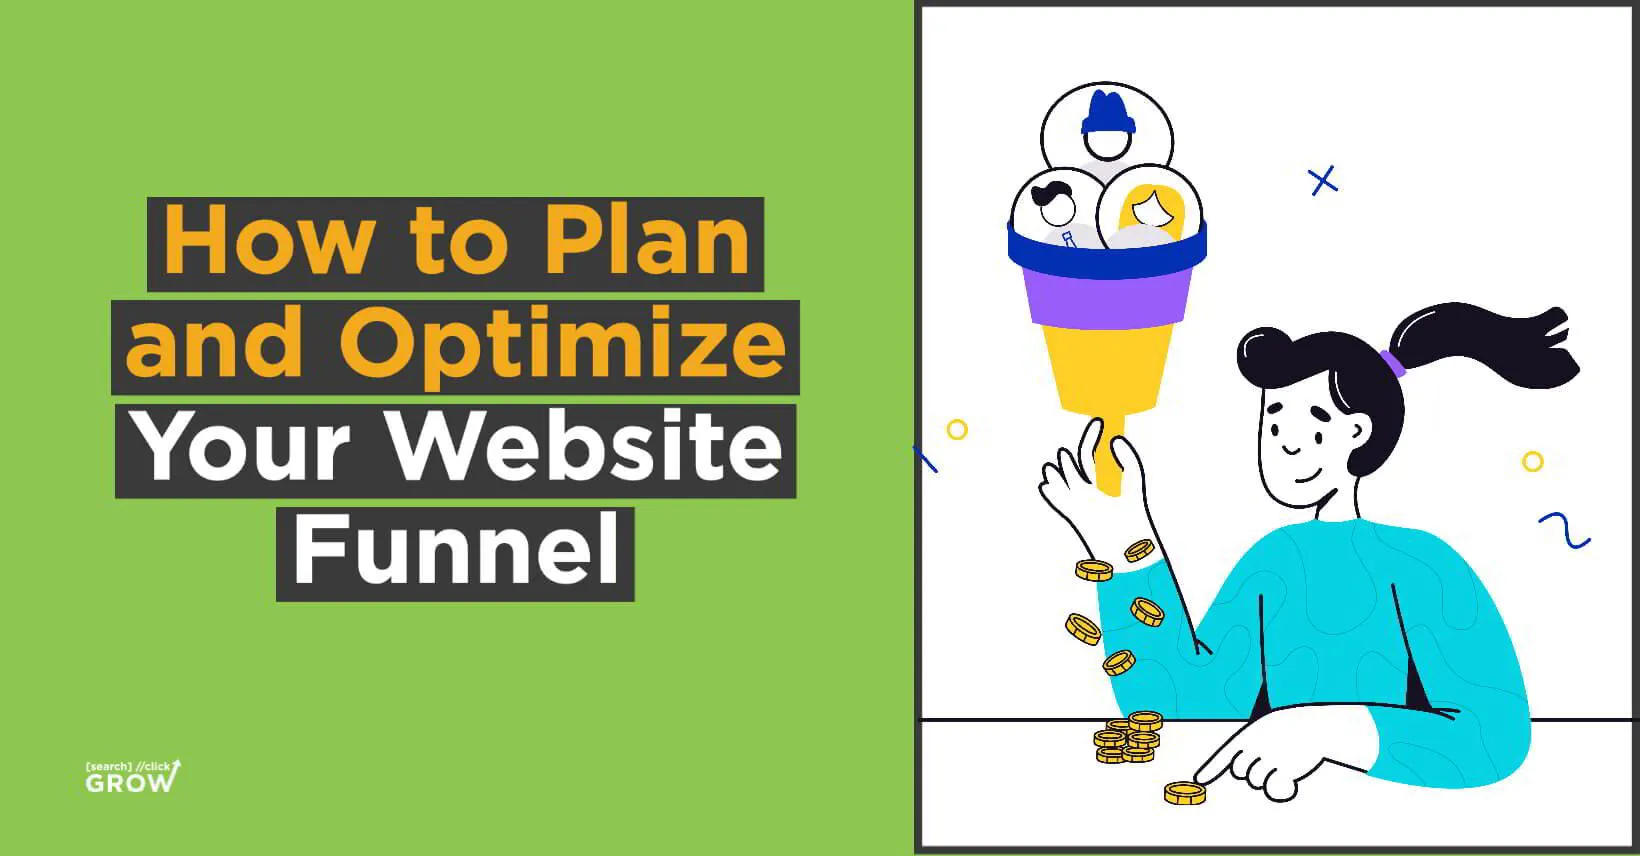 How to Plan and Optimize Your Website Funnel